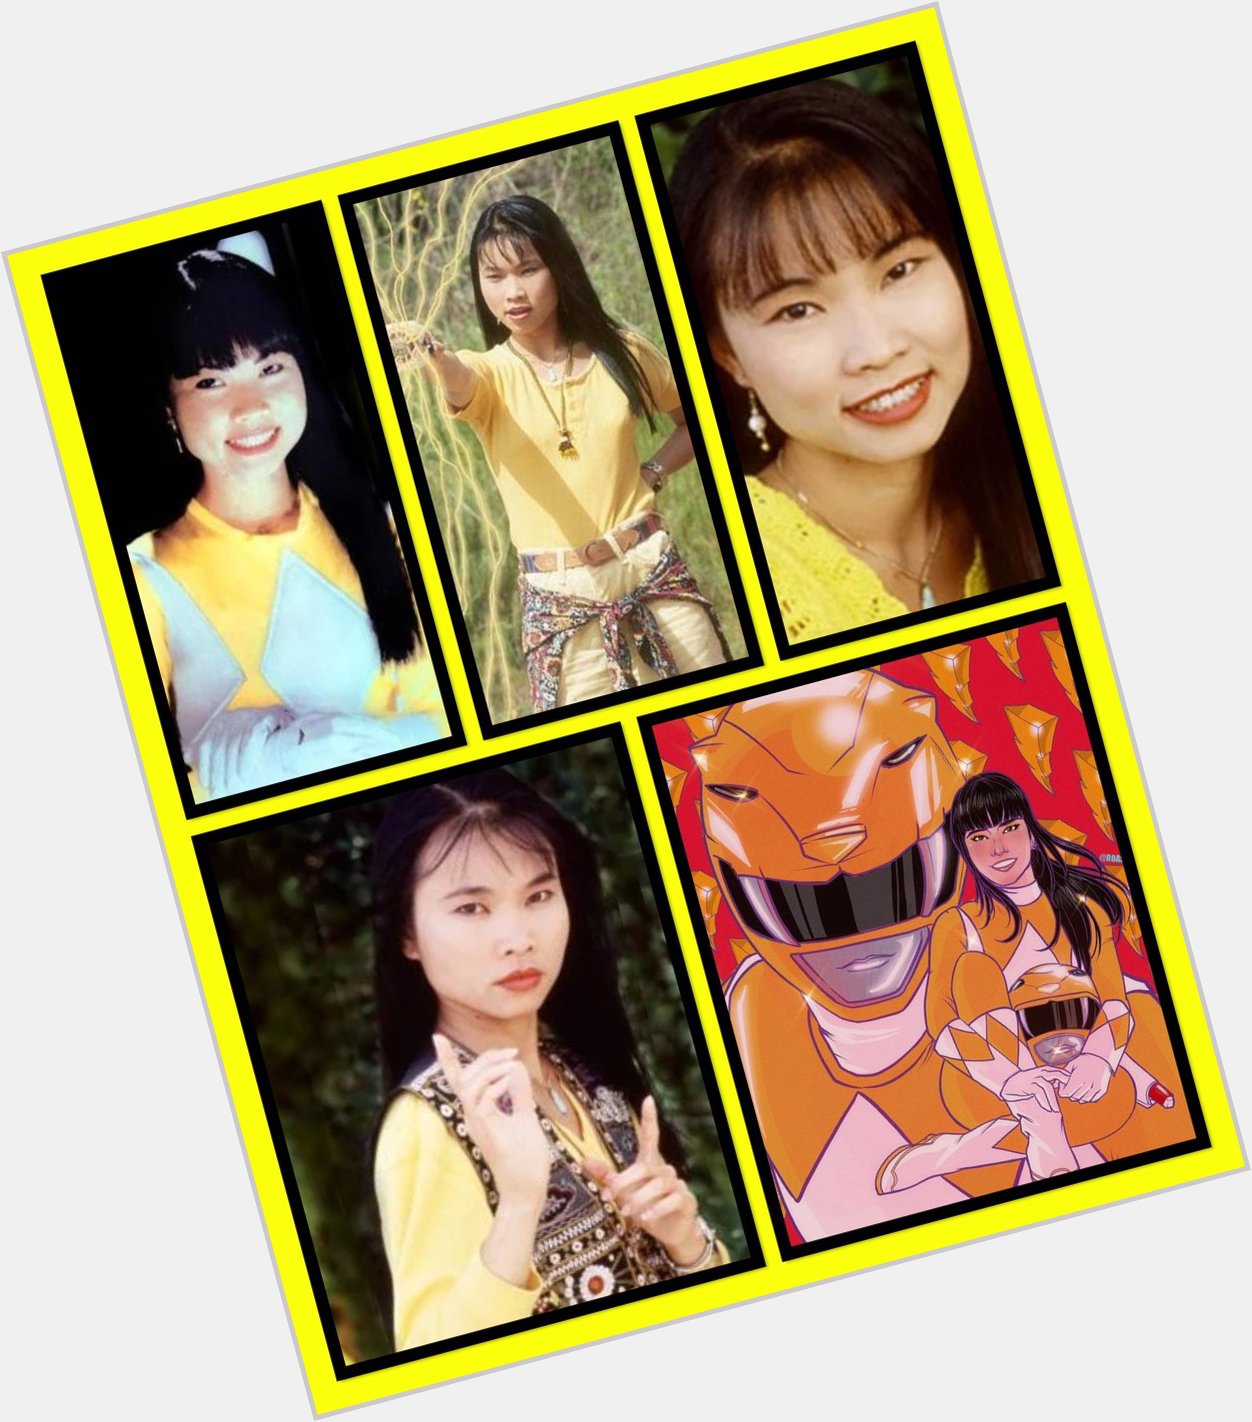 Happy Birthday to the late Thuy Trang

Fan Art by 